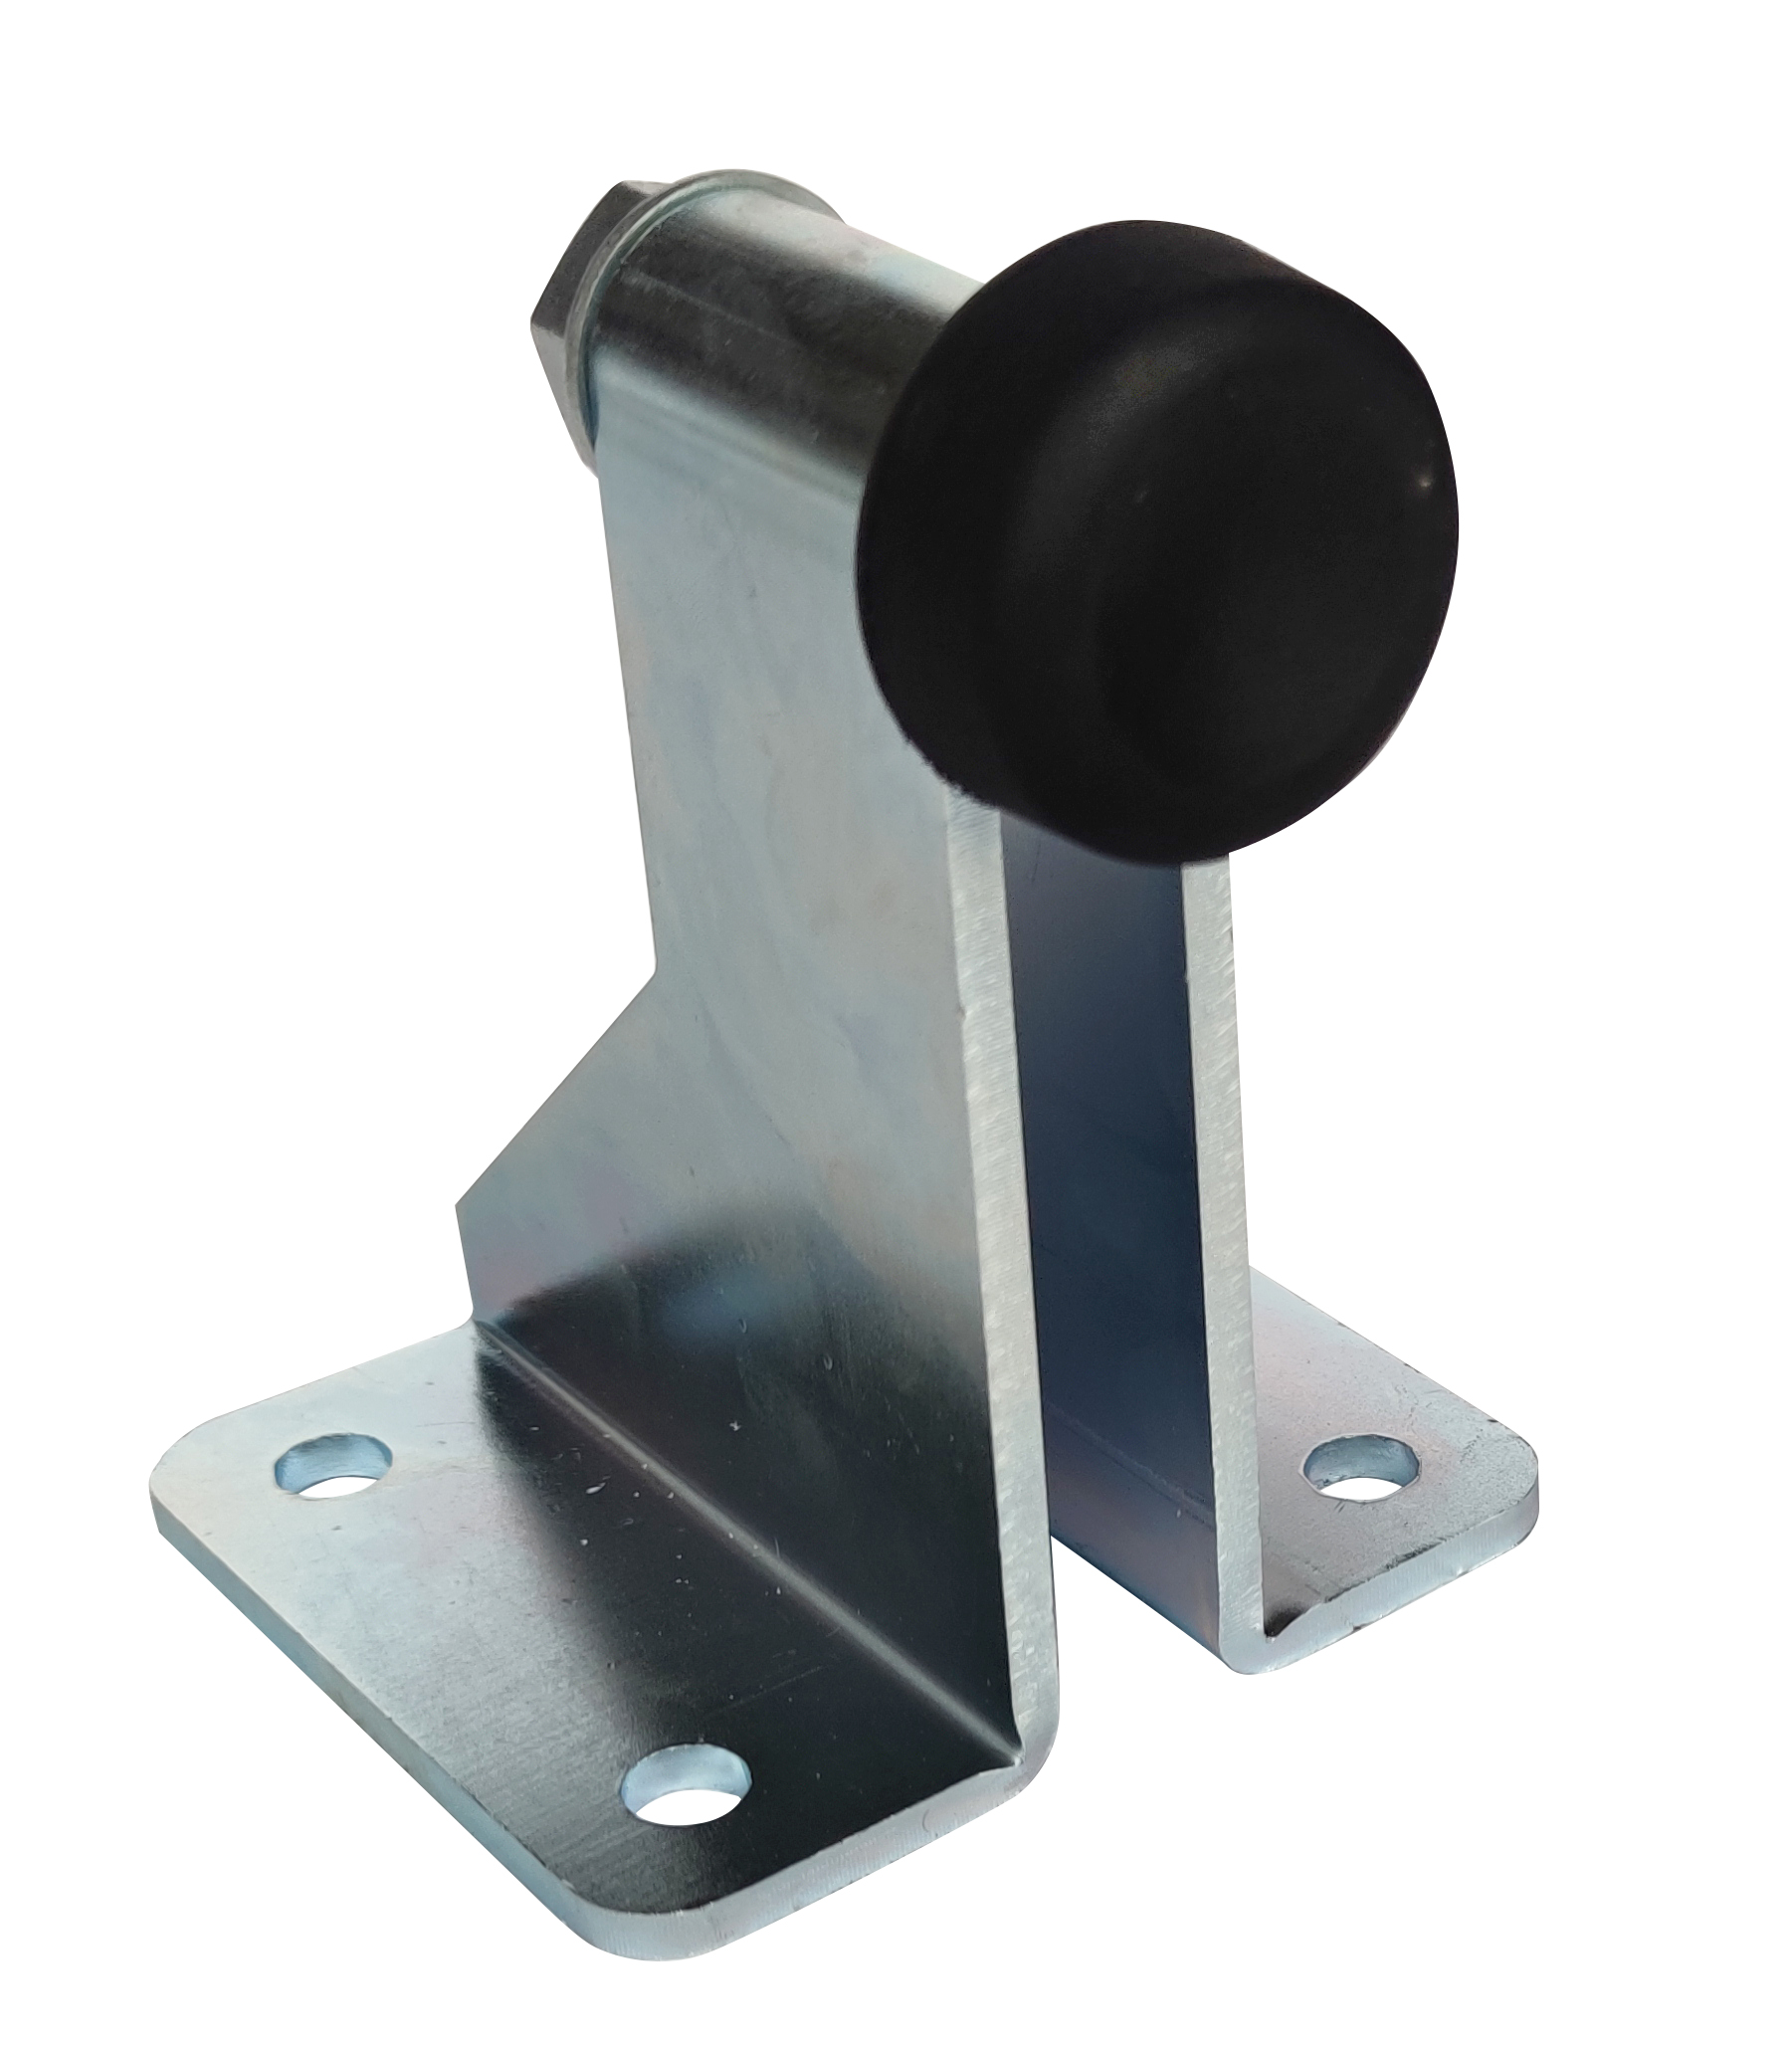 Silver Zinc Plated Adjustable Metal Gate Stopper With Rubber Buffer